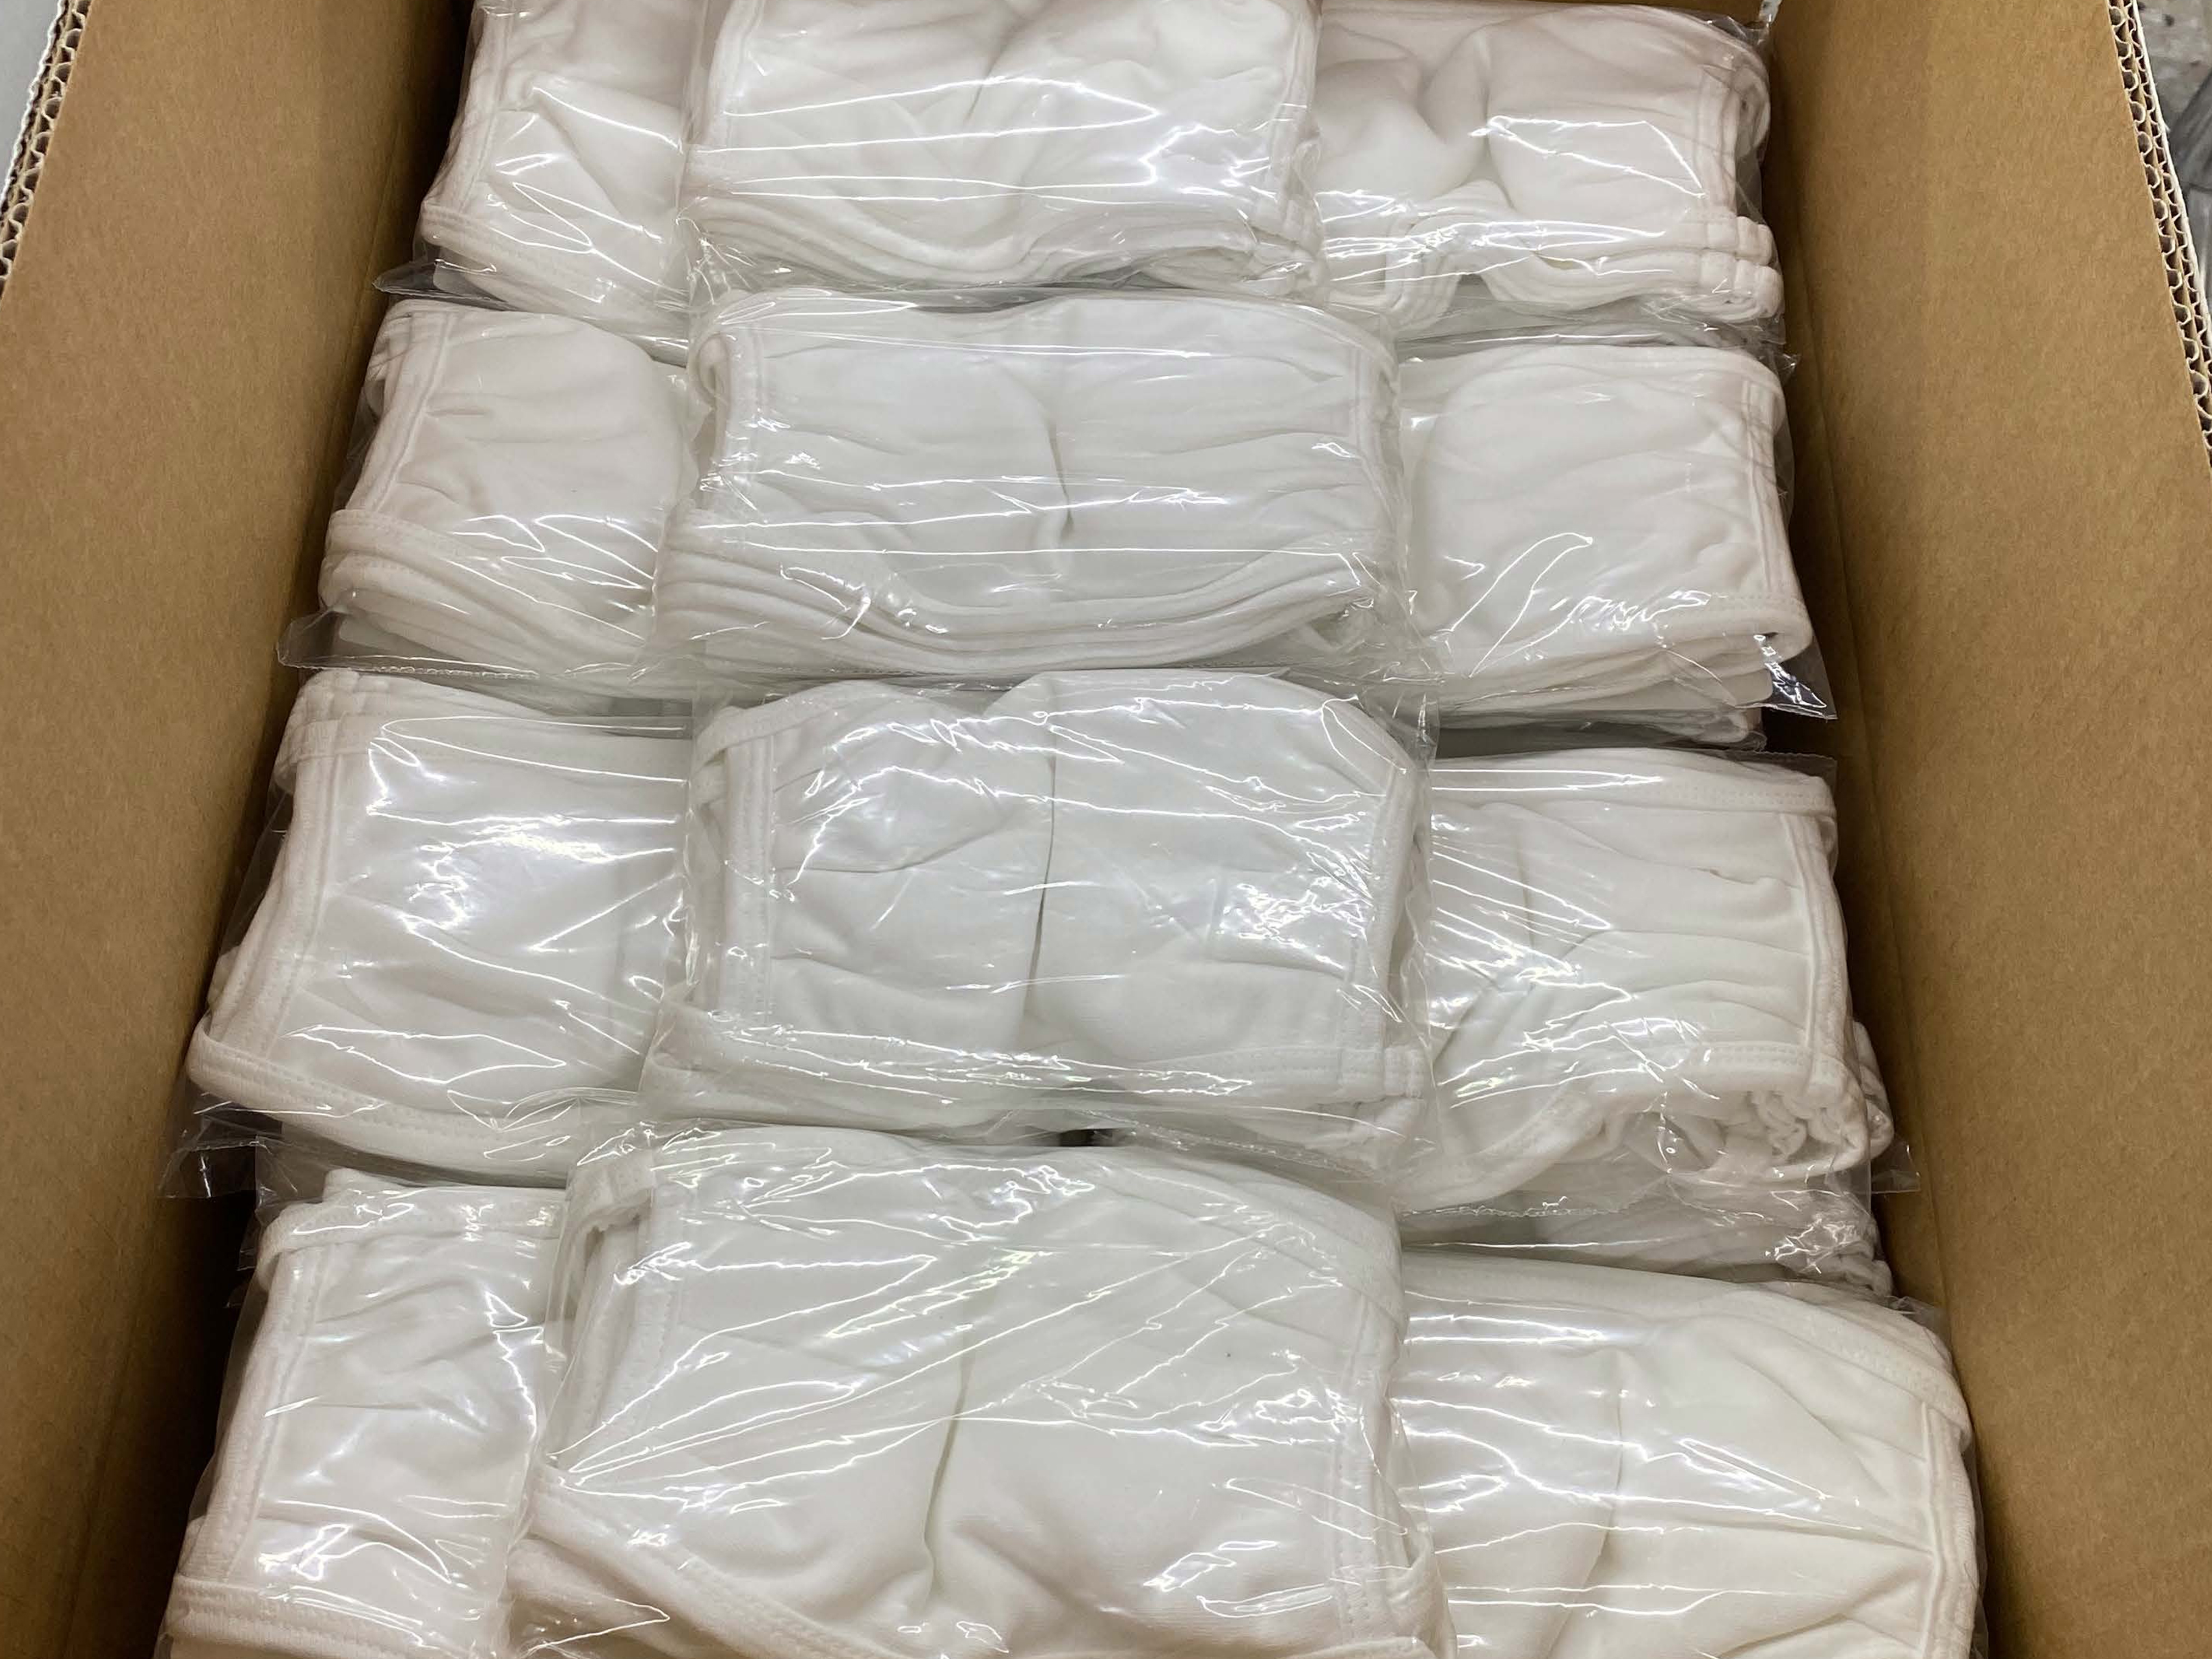 Bundles of cloth face masks are packaged and placed into boxes for shipment.